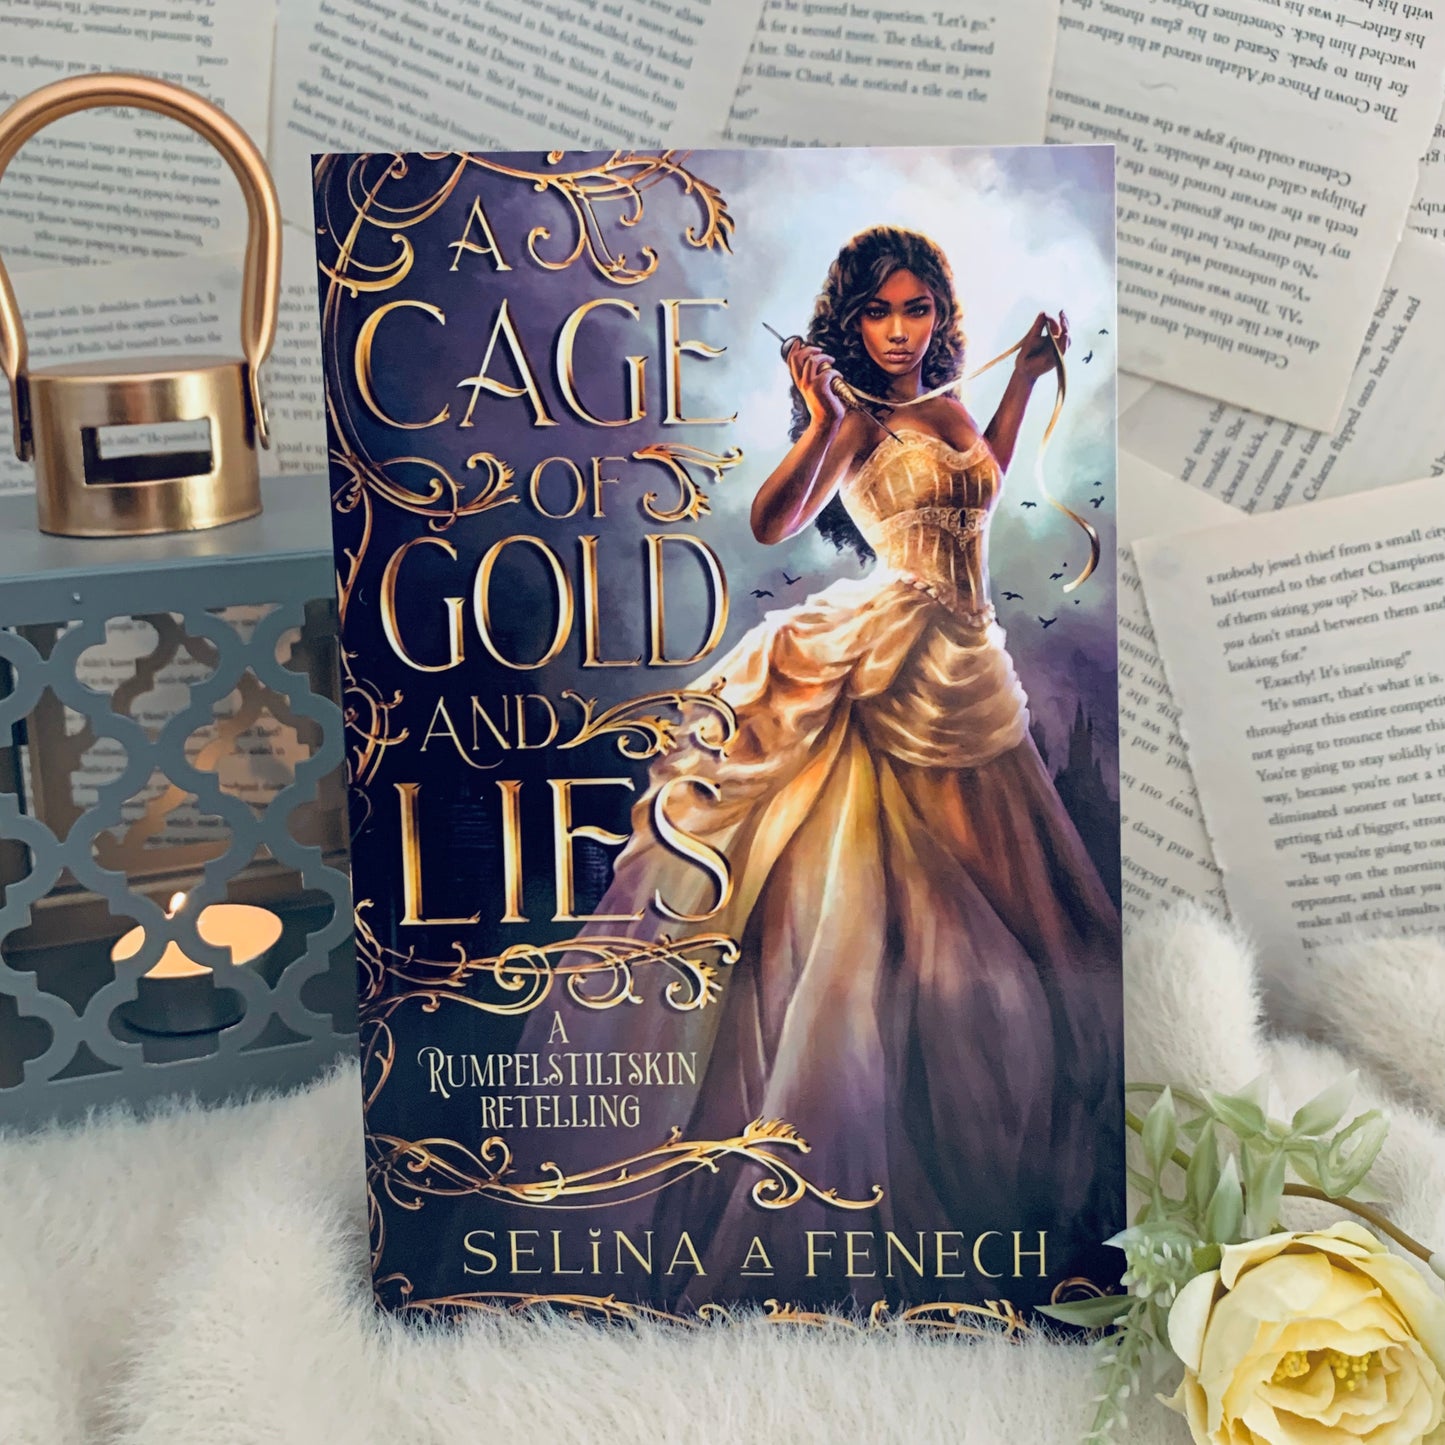 A Cage of Gold and Lies by Selina A Fenech